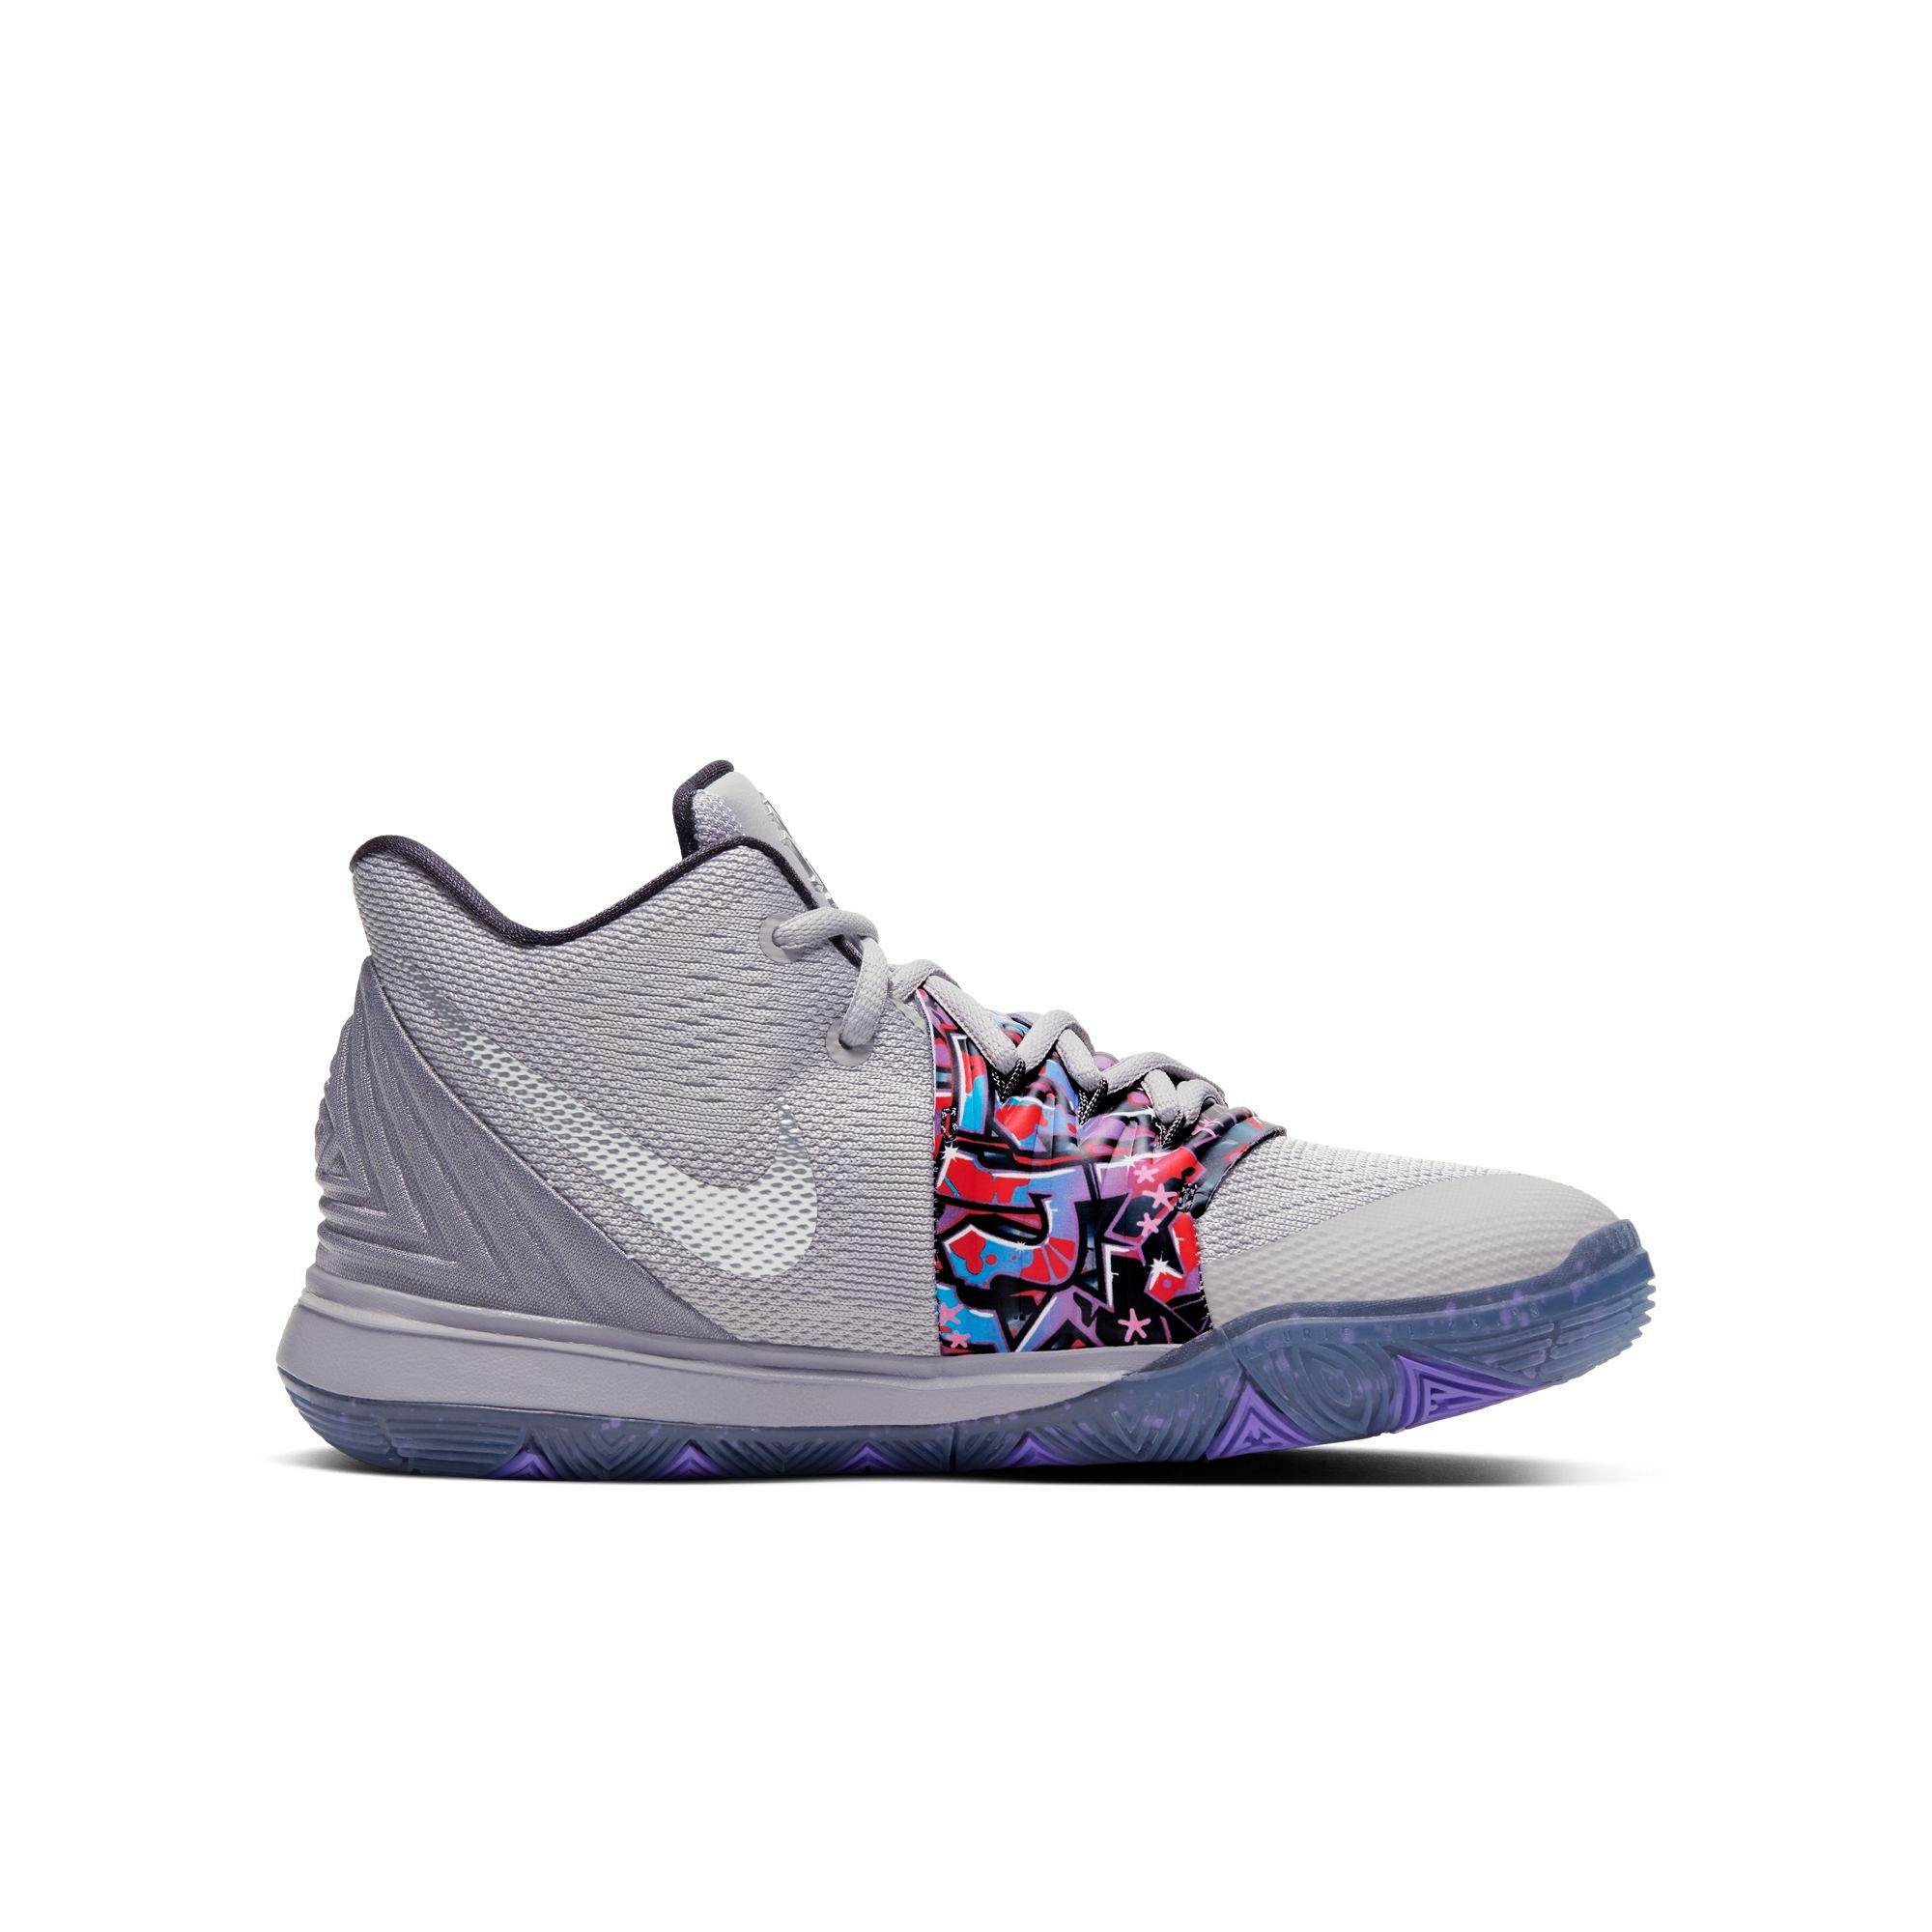 Kyrie 5 X Pineapple House Sale COD Shopee philippines